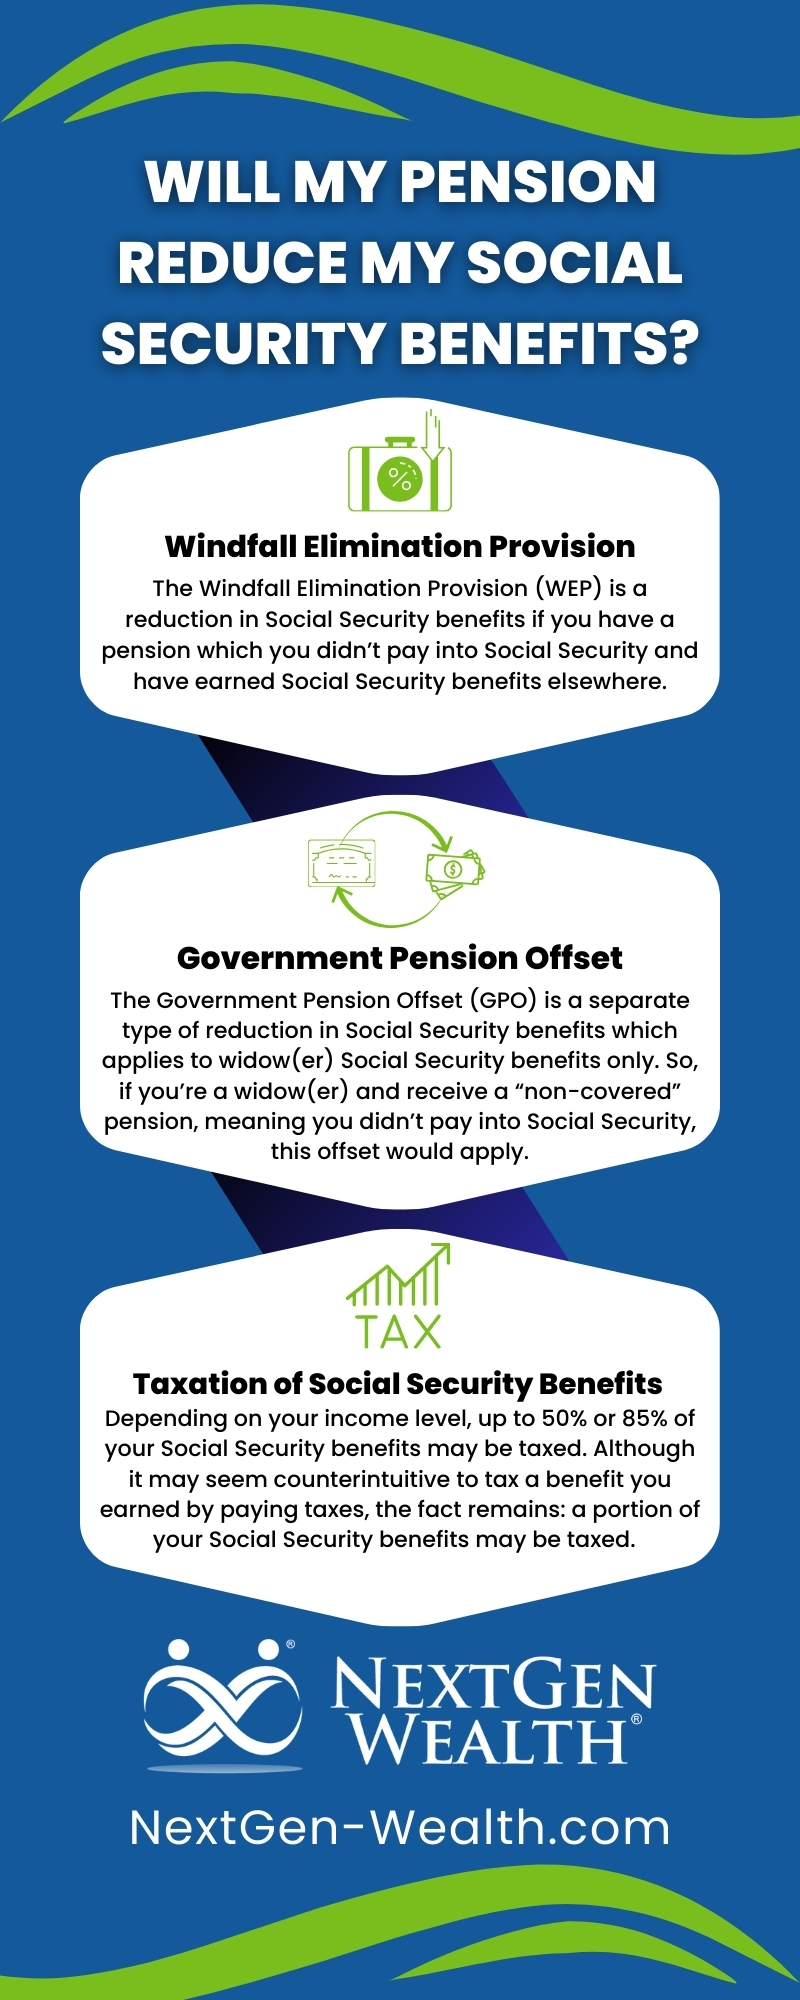 Will My Pension Reduce My Social Security Benefits Infographic